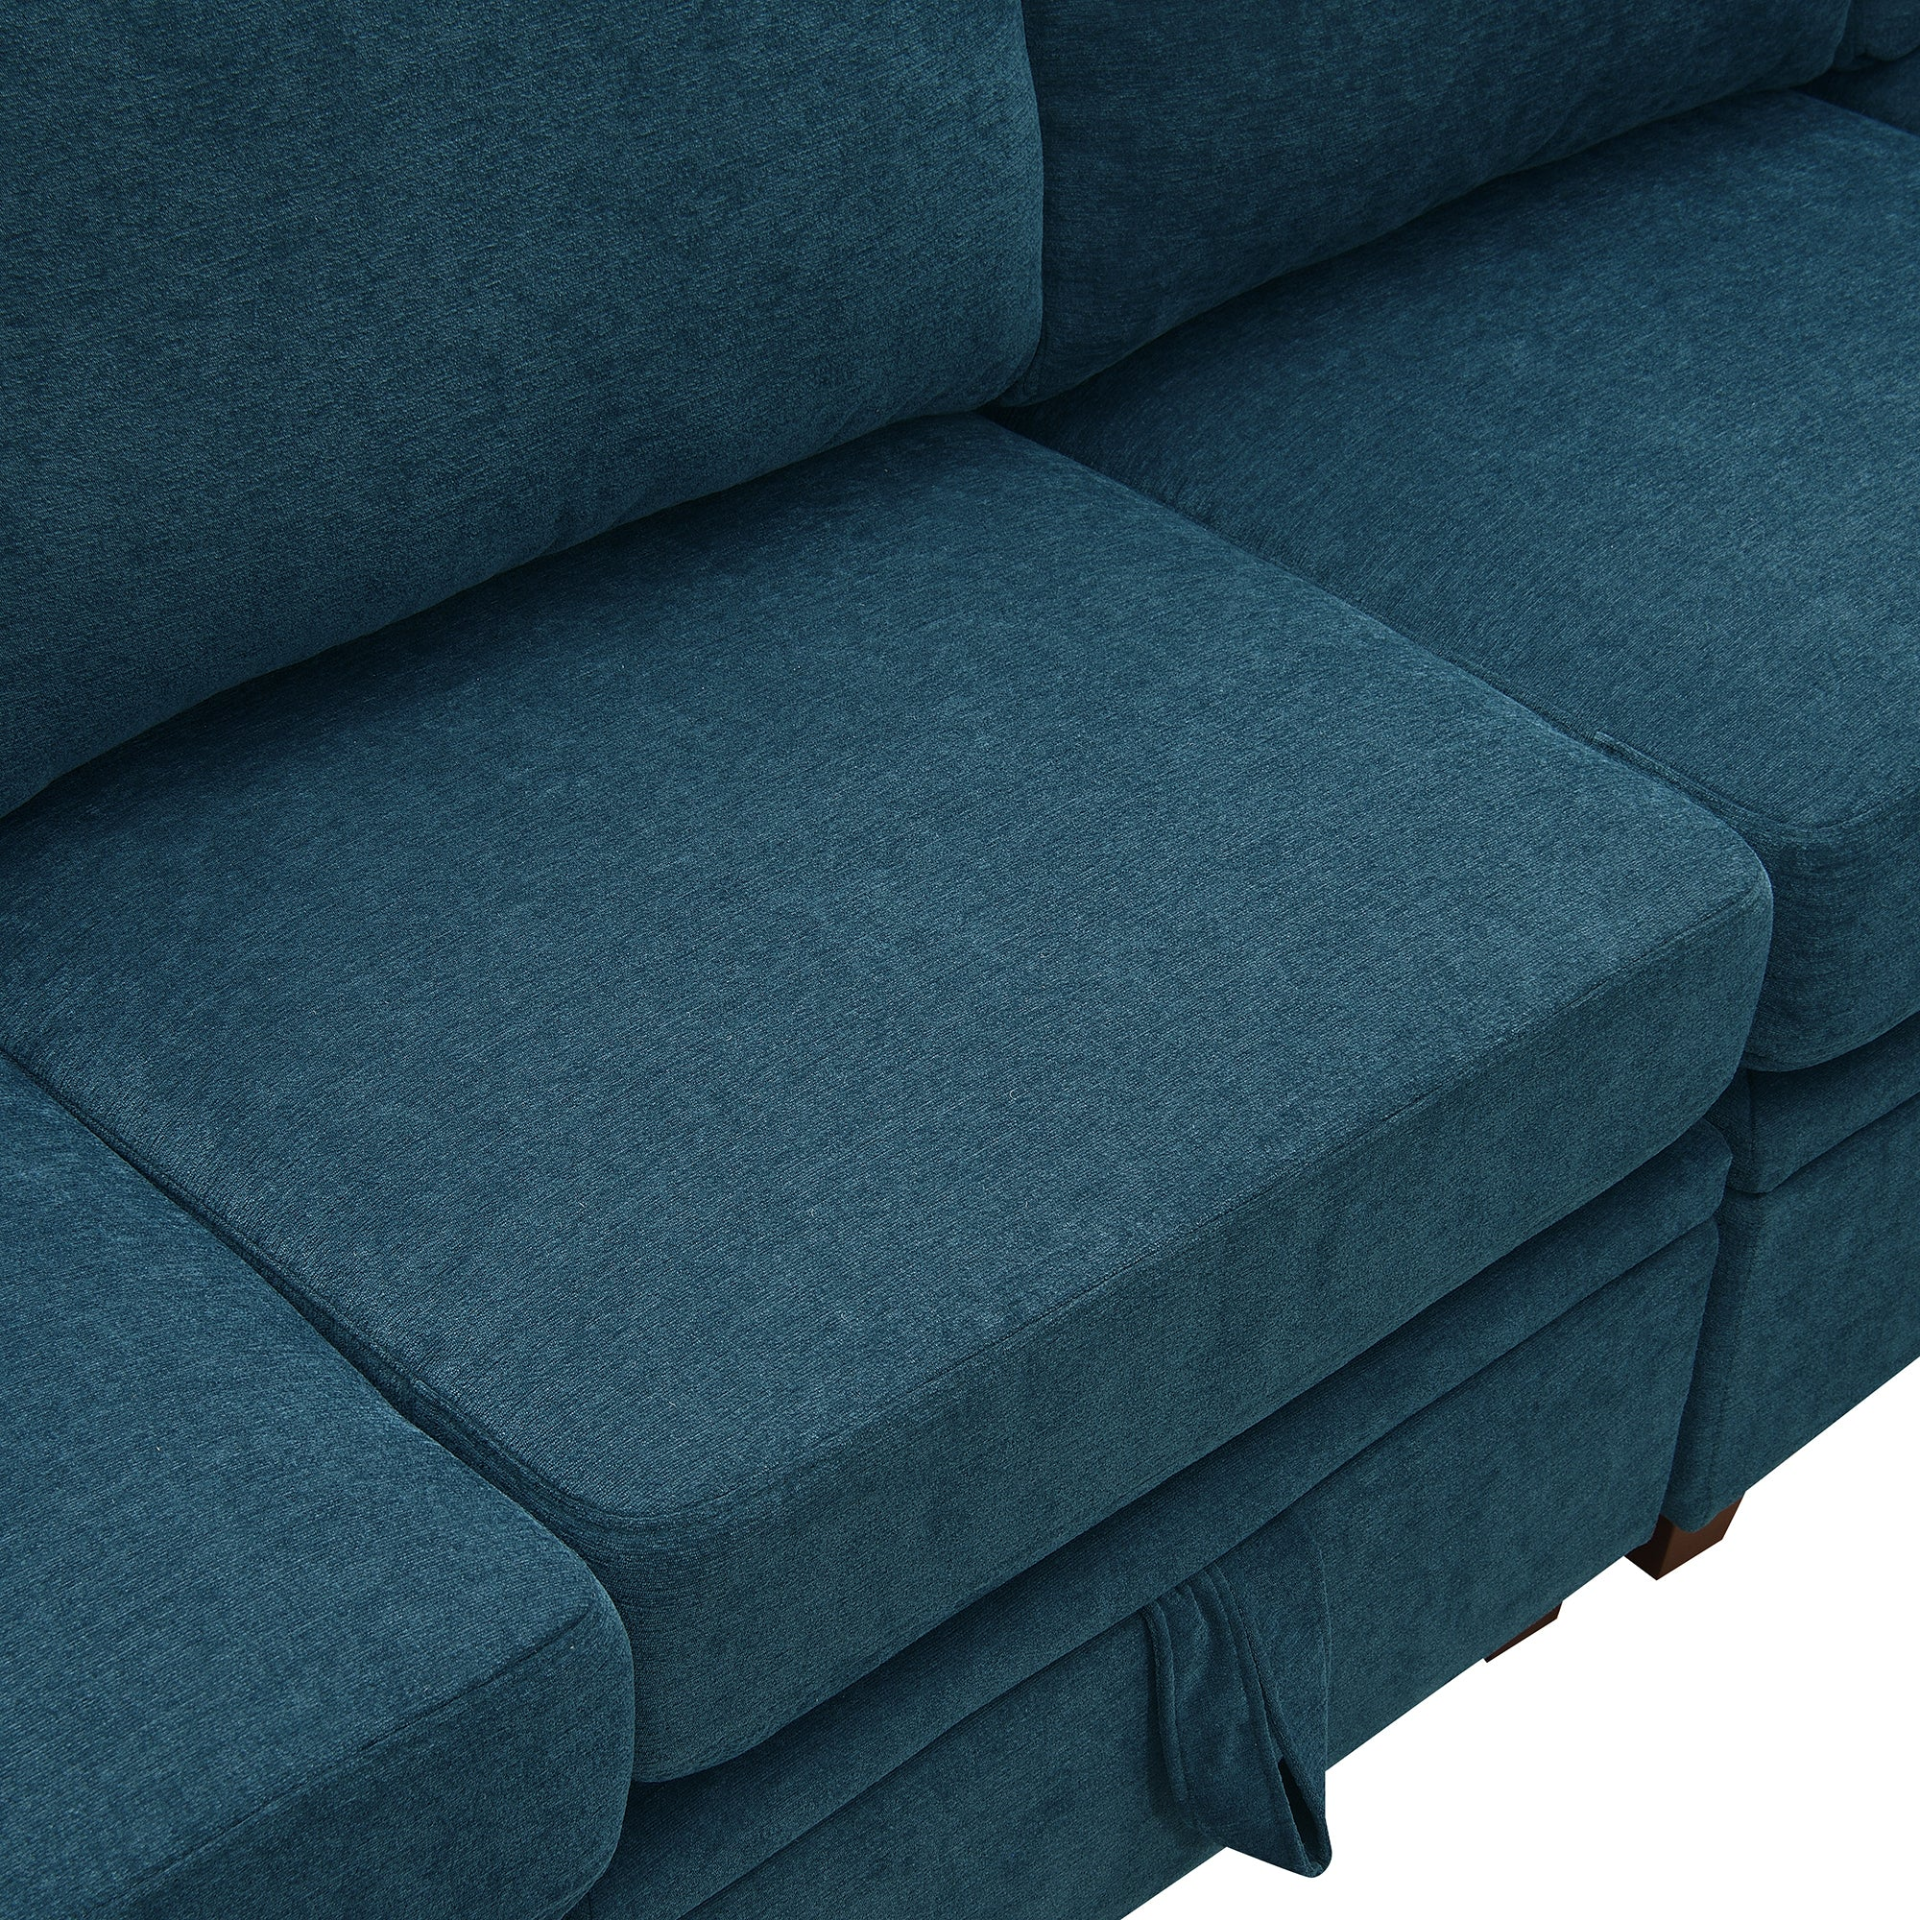 Blue - Trendy U-Shaped 6-Seat Chenille Modular Sectional Sofa with Storage, Adjustable Armrests and Backrests (109"x54")